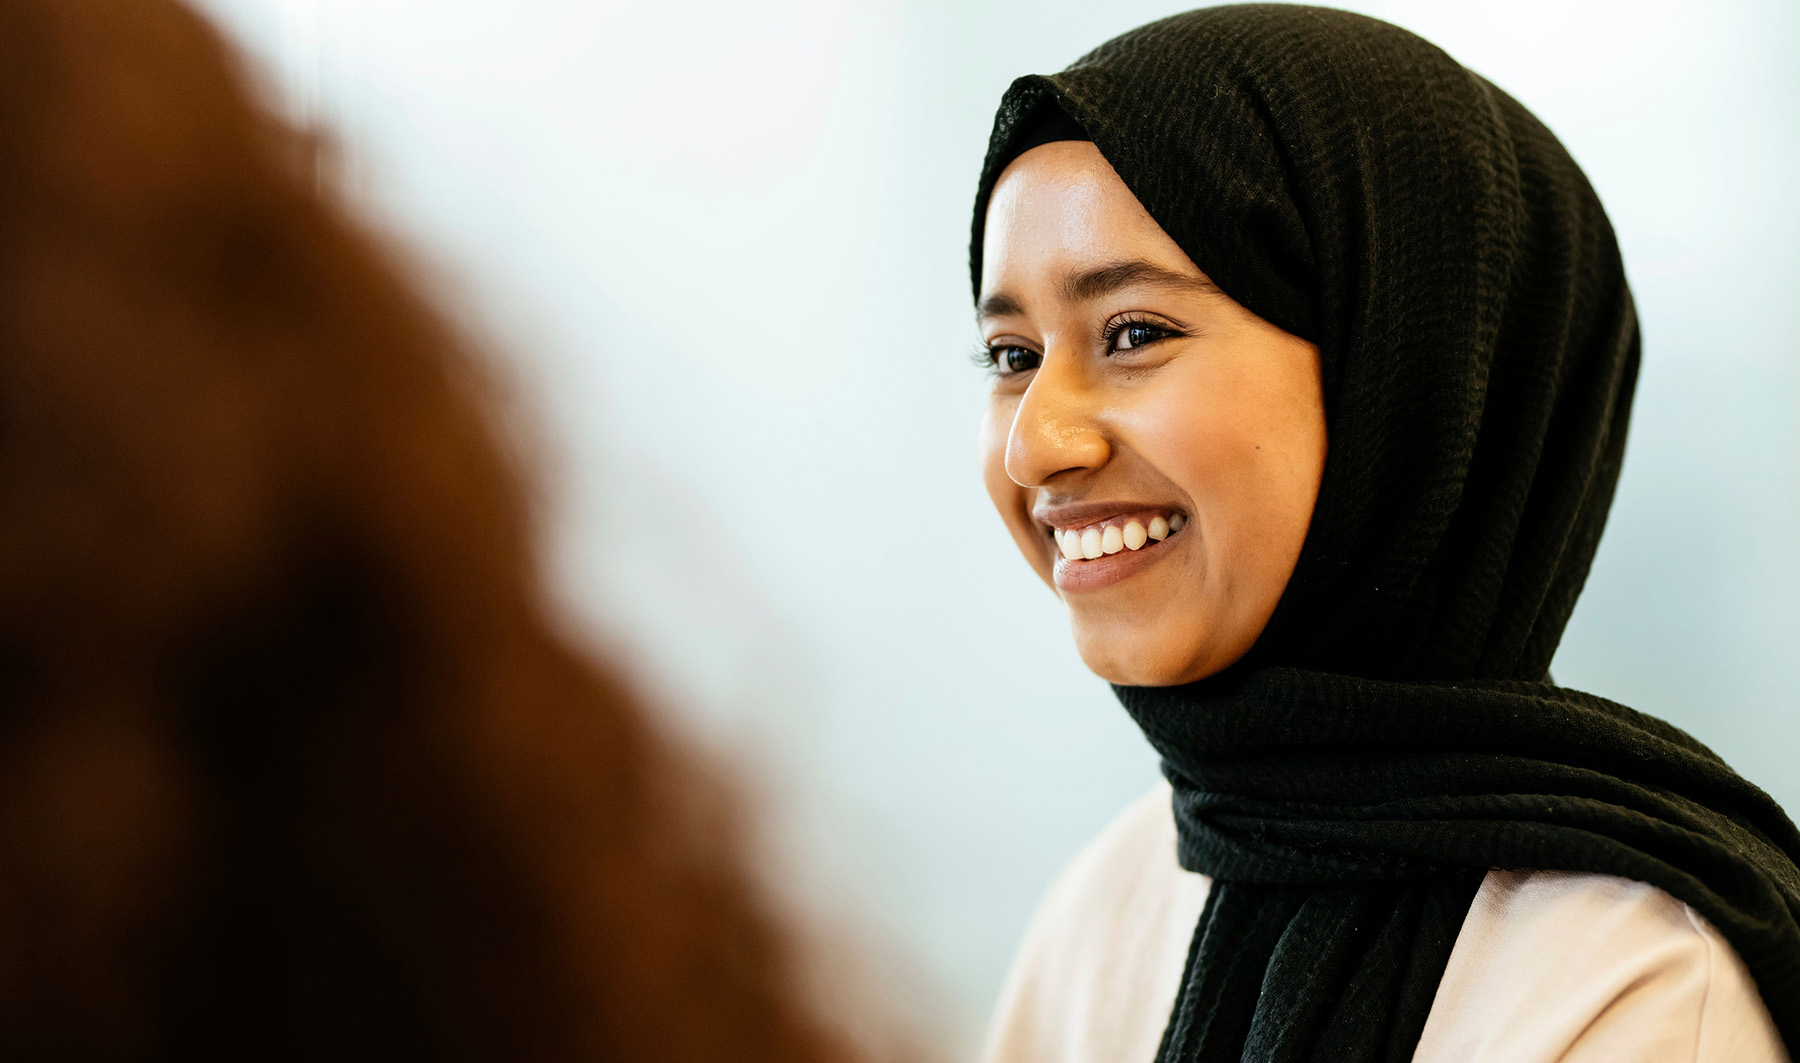 Young female Knight Frank employee wearing a head scarf smiling during a meeting